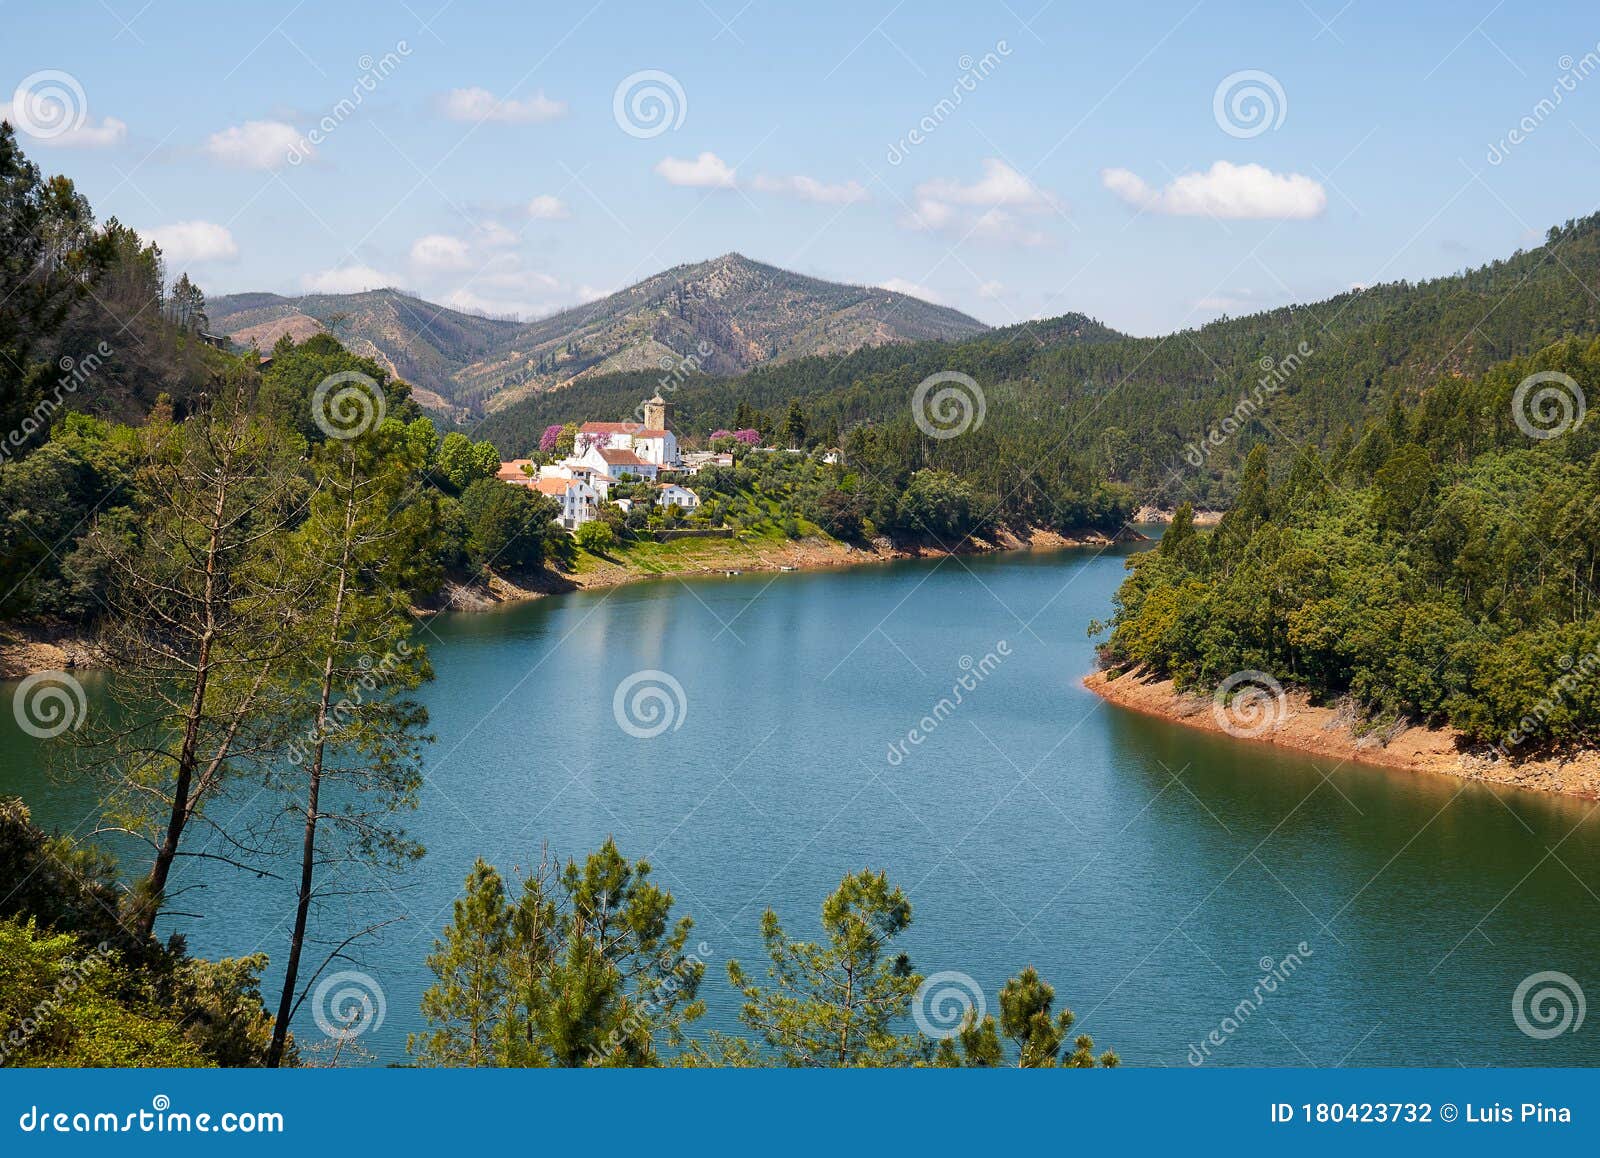 dornes city and landscape panoramic view with zezere river, in portugal